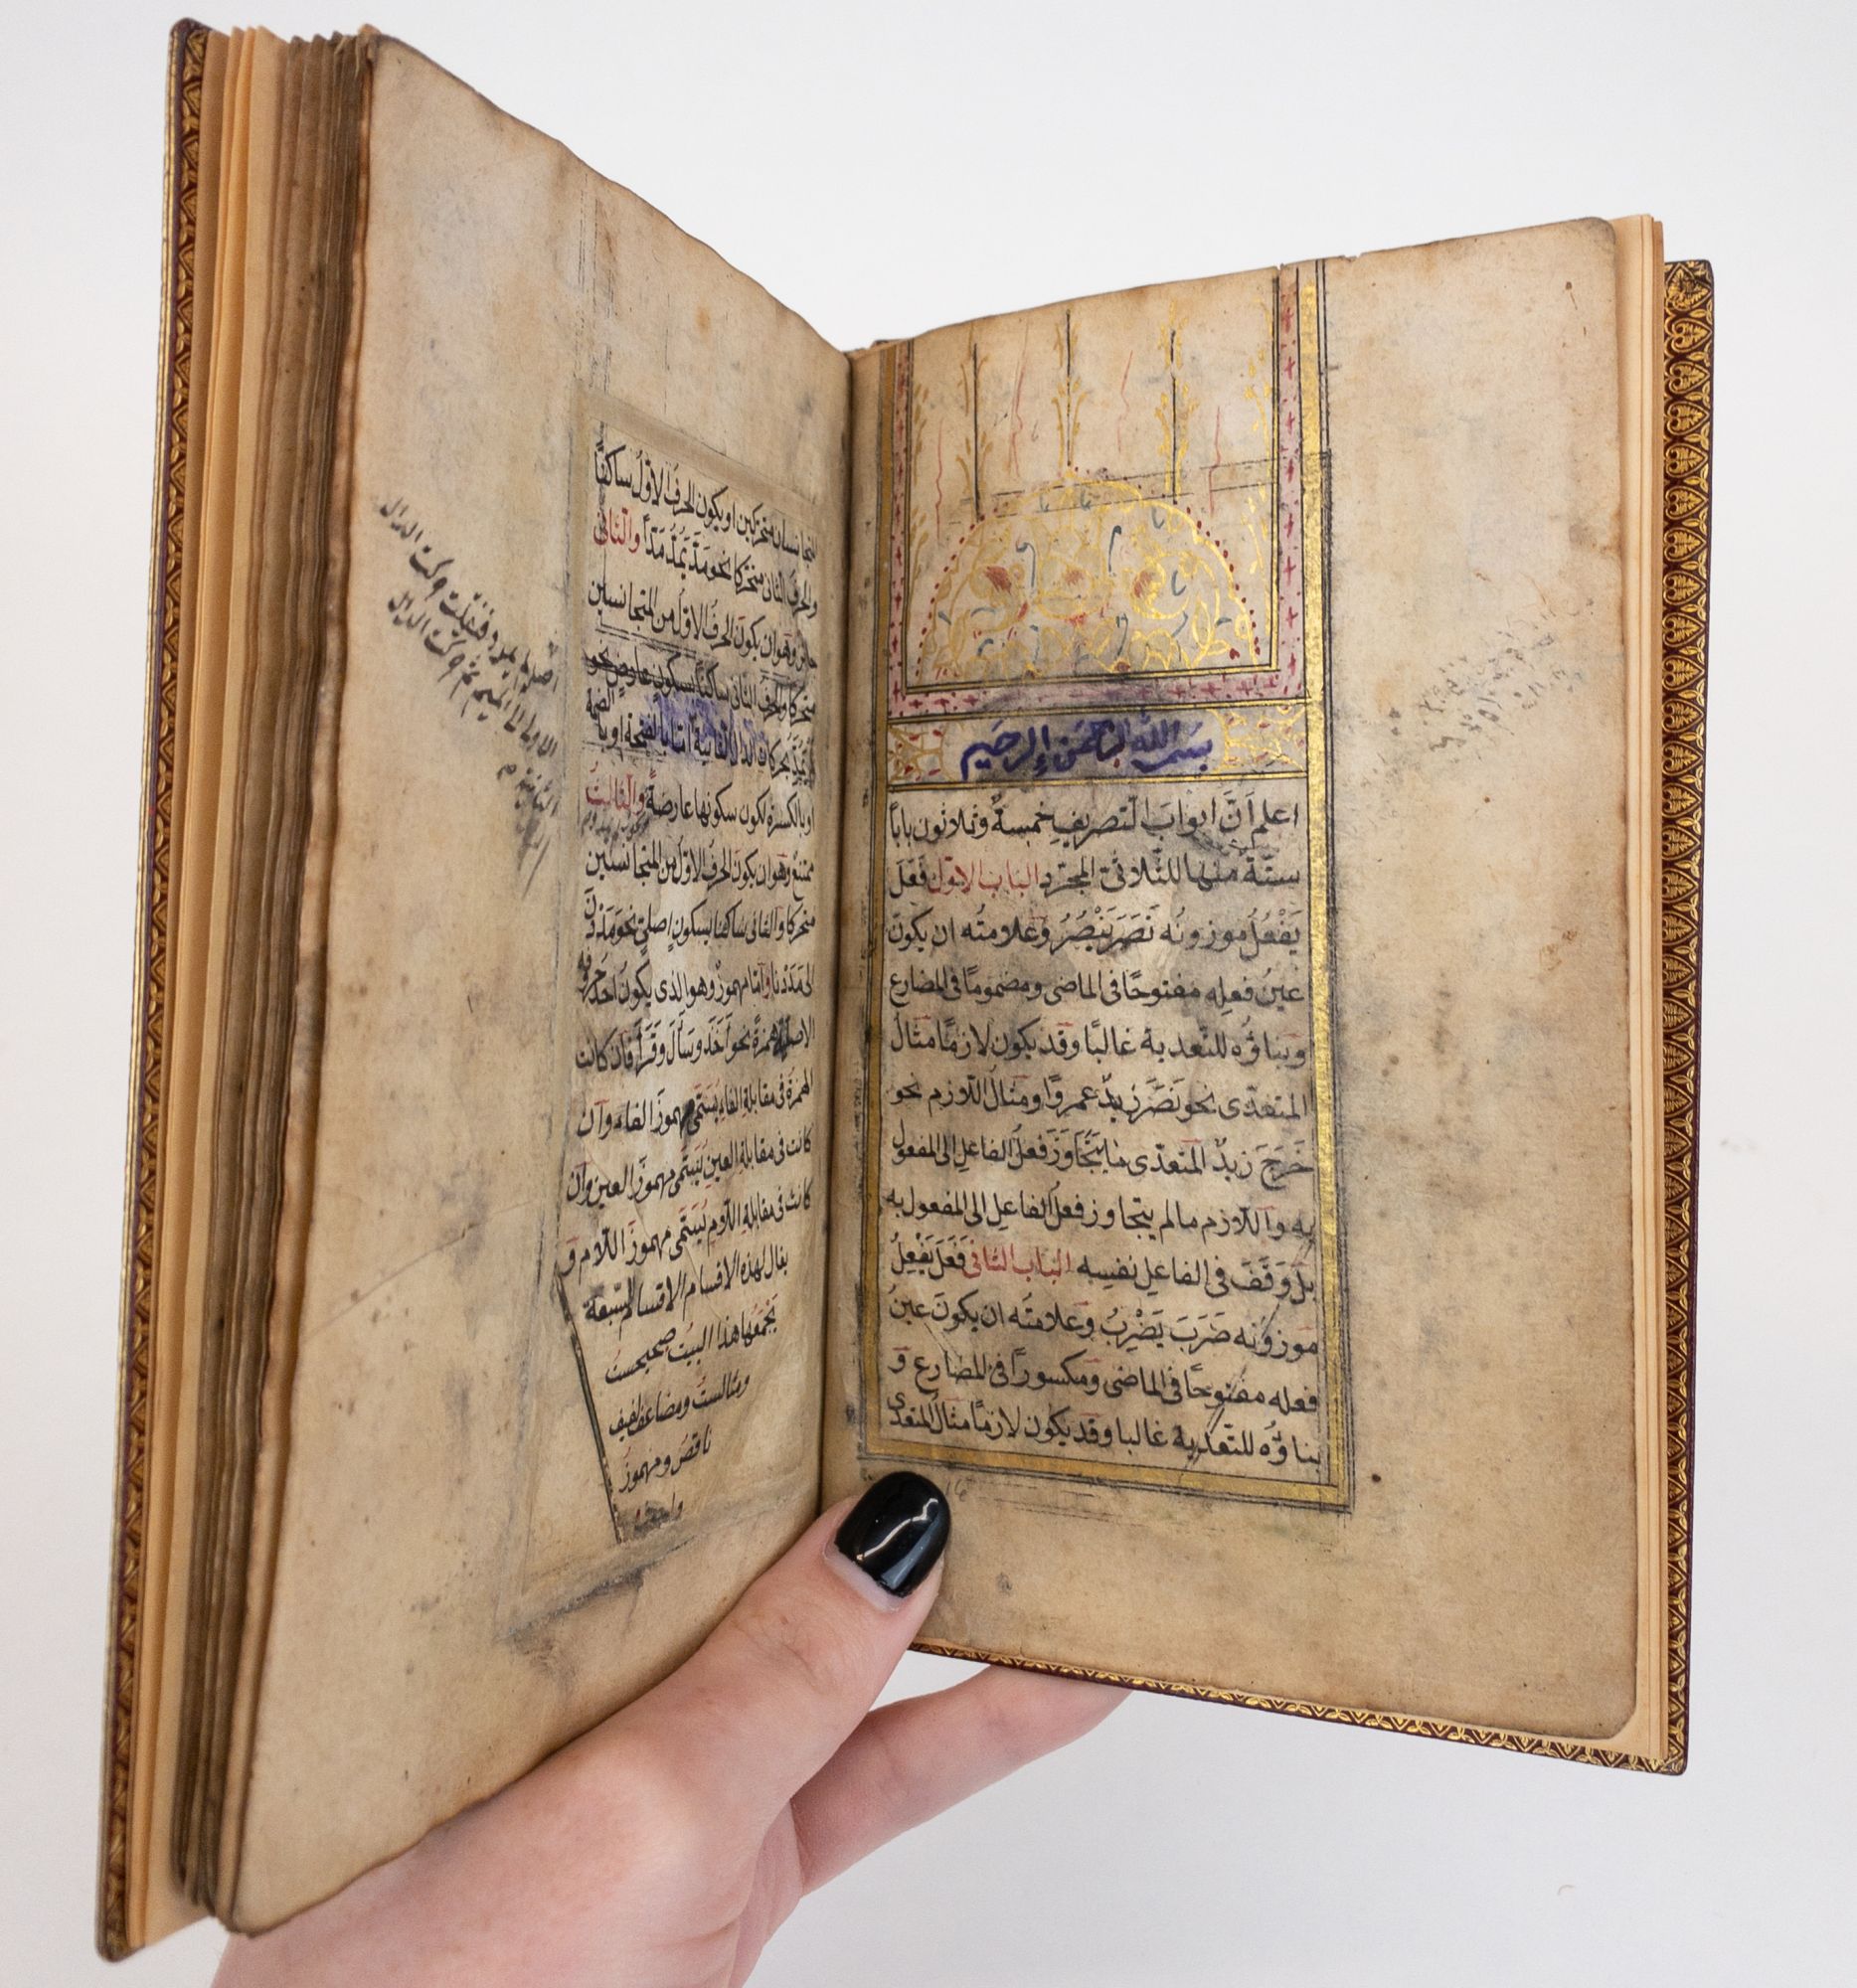 Product Image for AL-AMTHILA AL-MUKHTALIFA [Table of General Examples of Arabic Grammatical Rules]